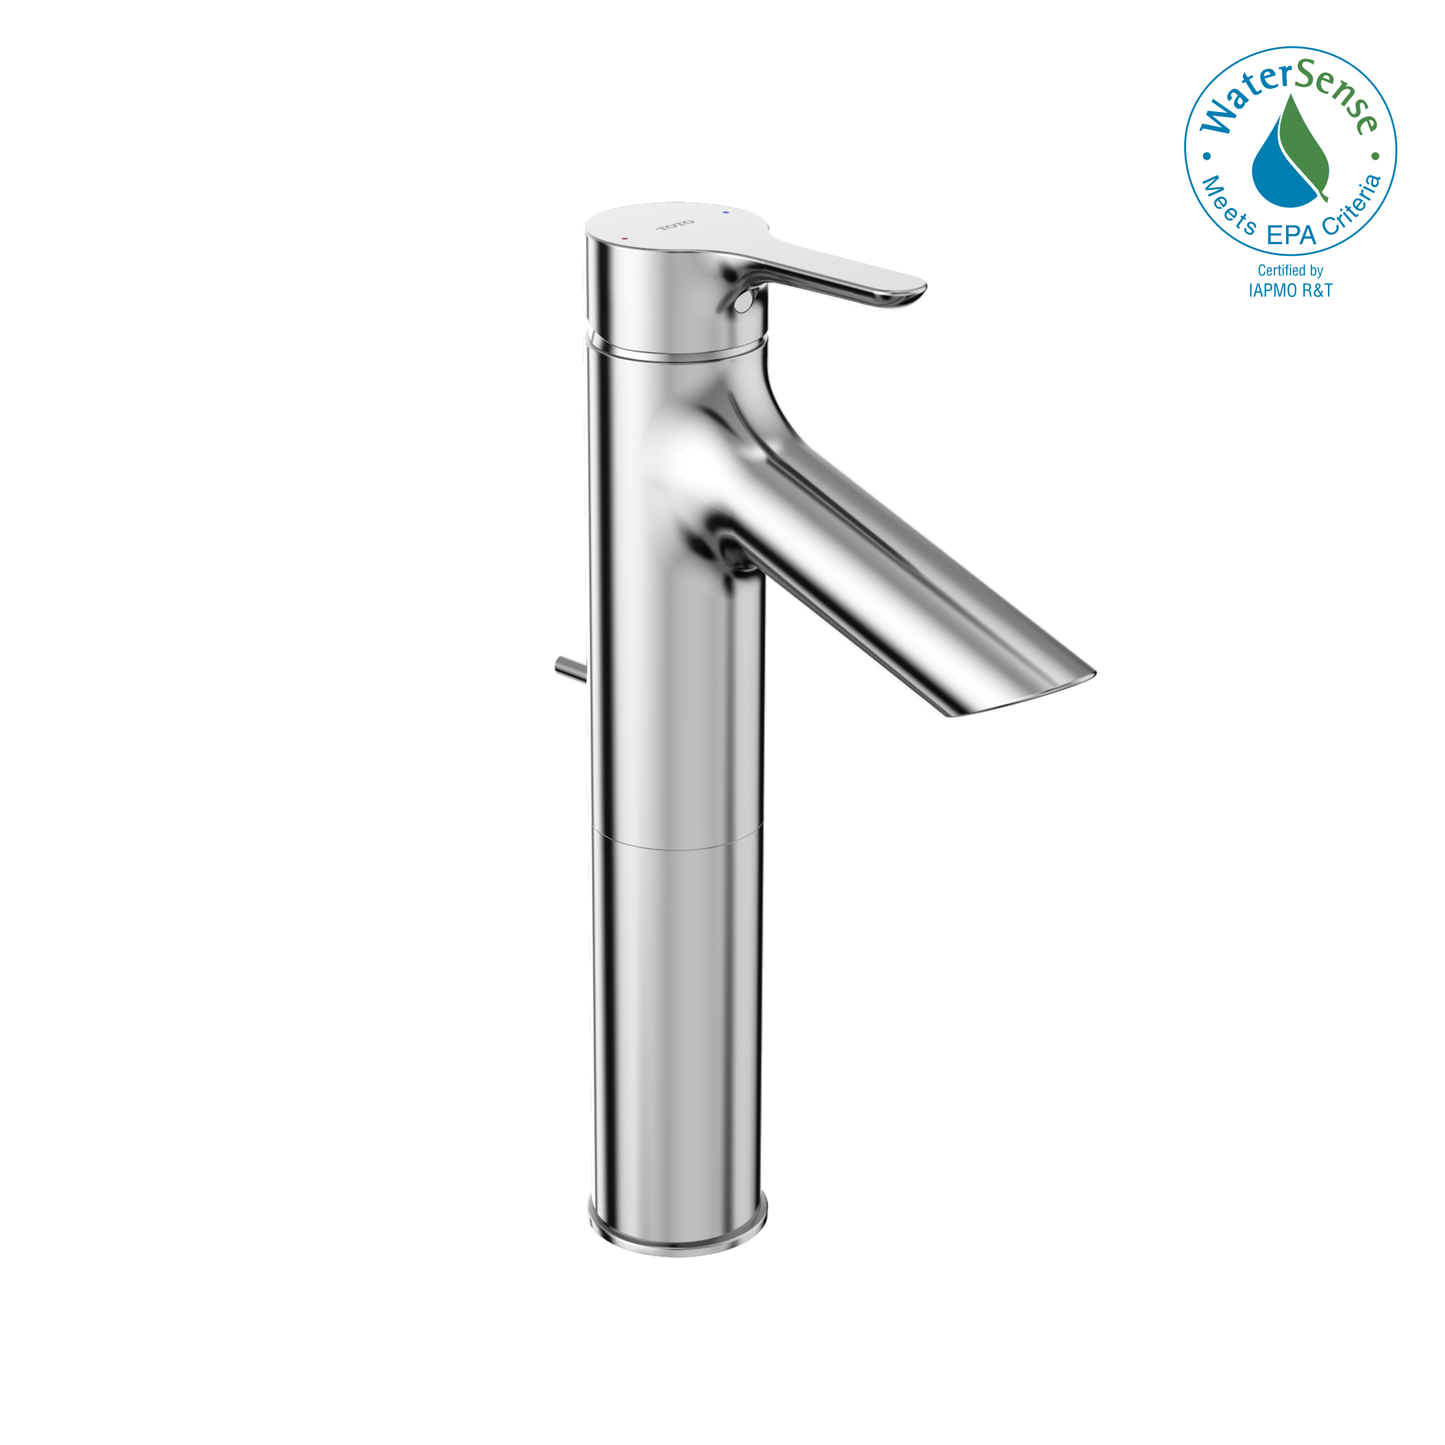 Toto TLS01304U#CP - Series 1.2GPM Single Handle Bathroom Faucet for Semi-Vessel Sink with Drain Asse